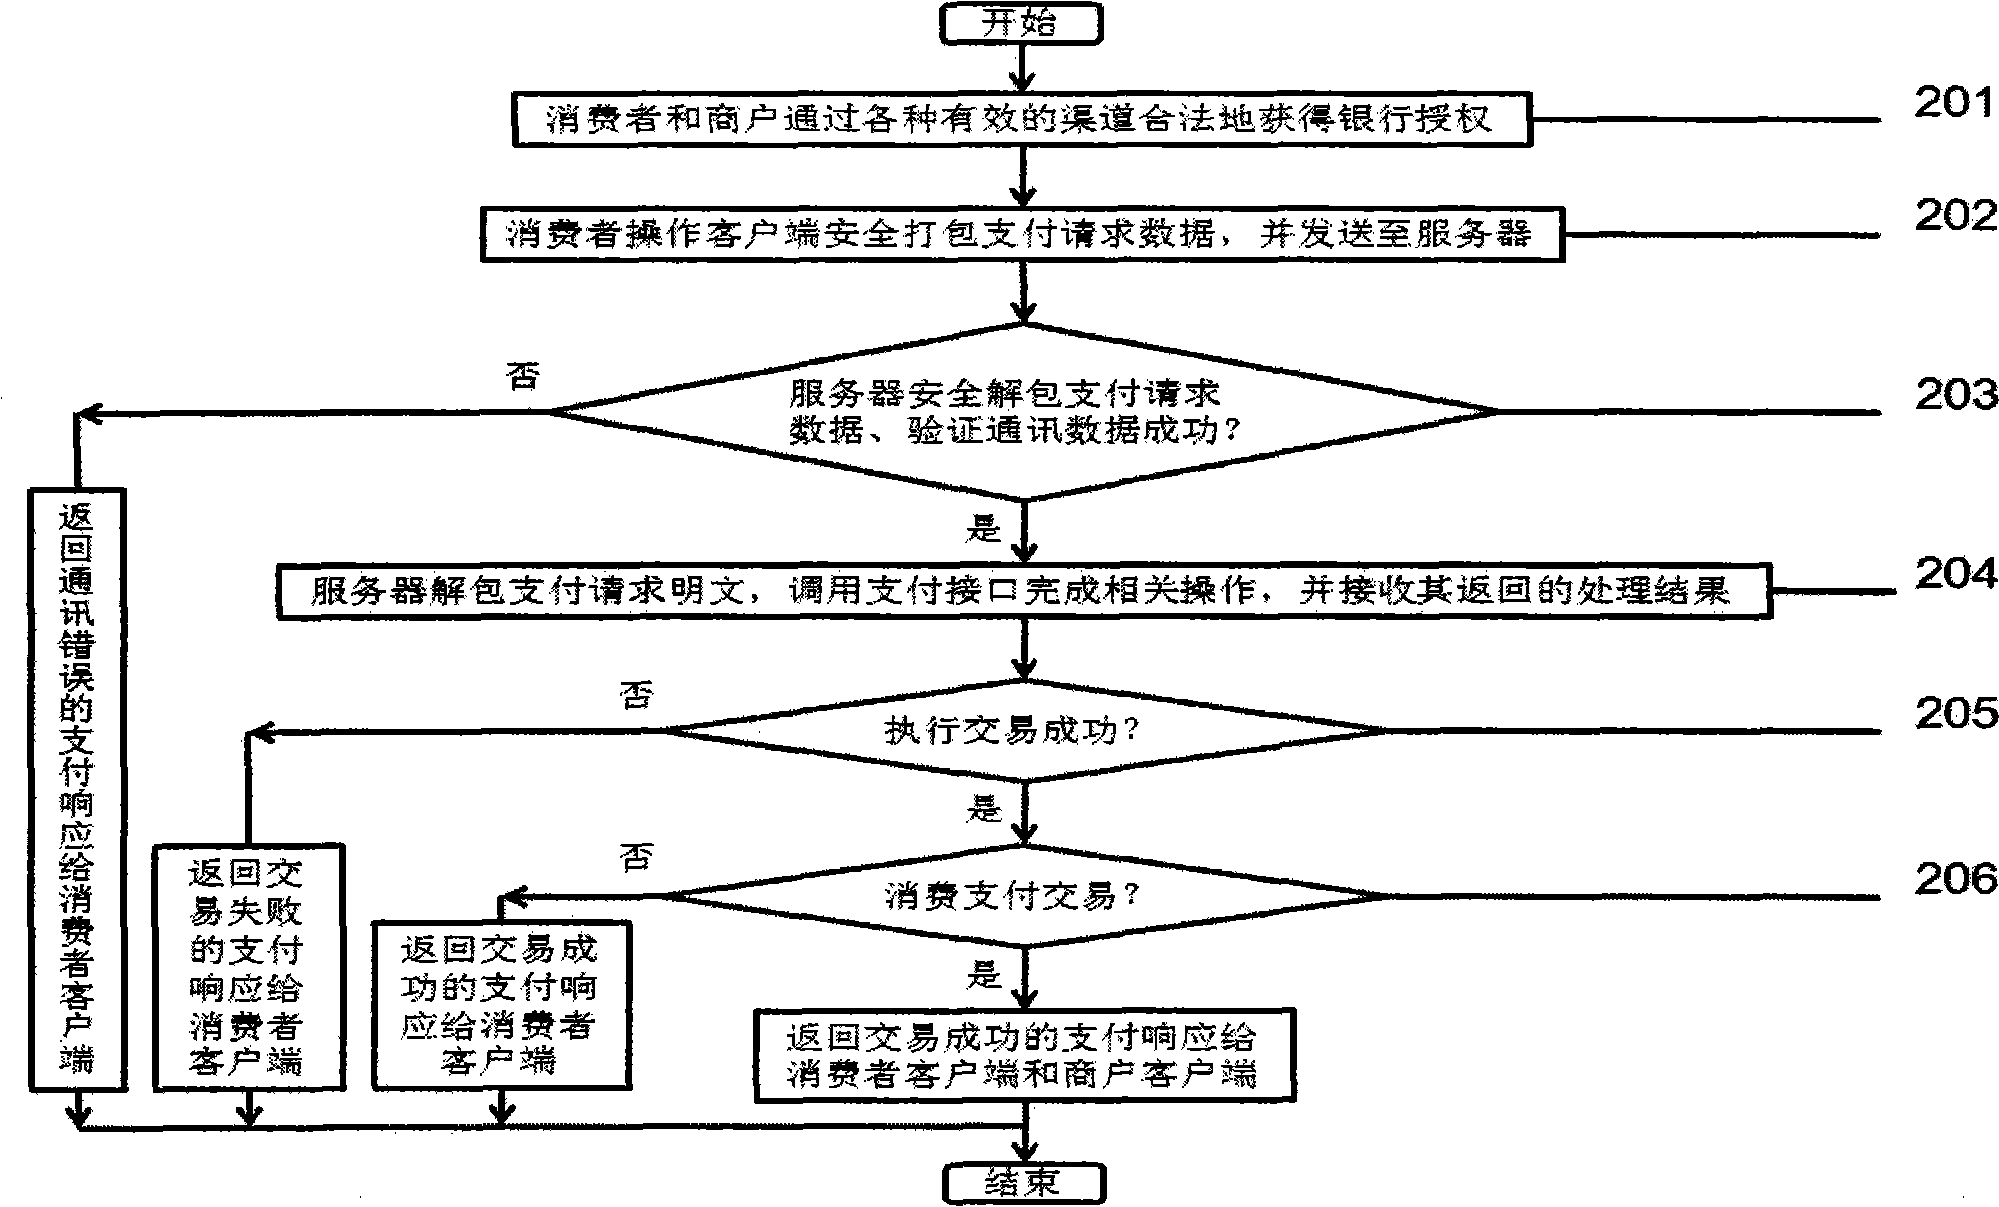 Consumer socialization zero-cash payment method and system